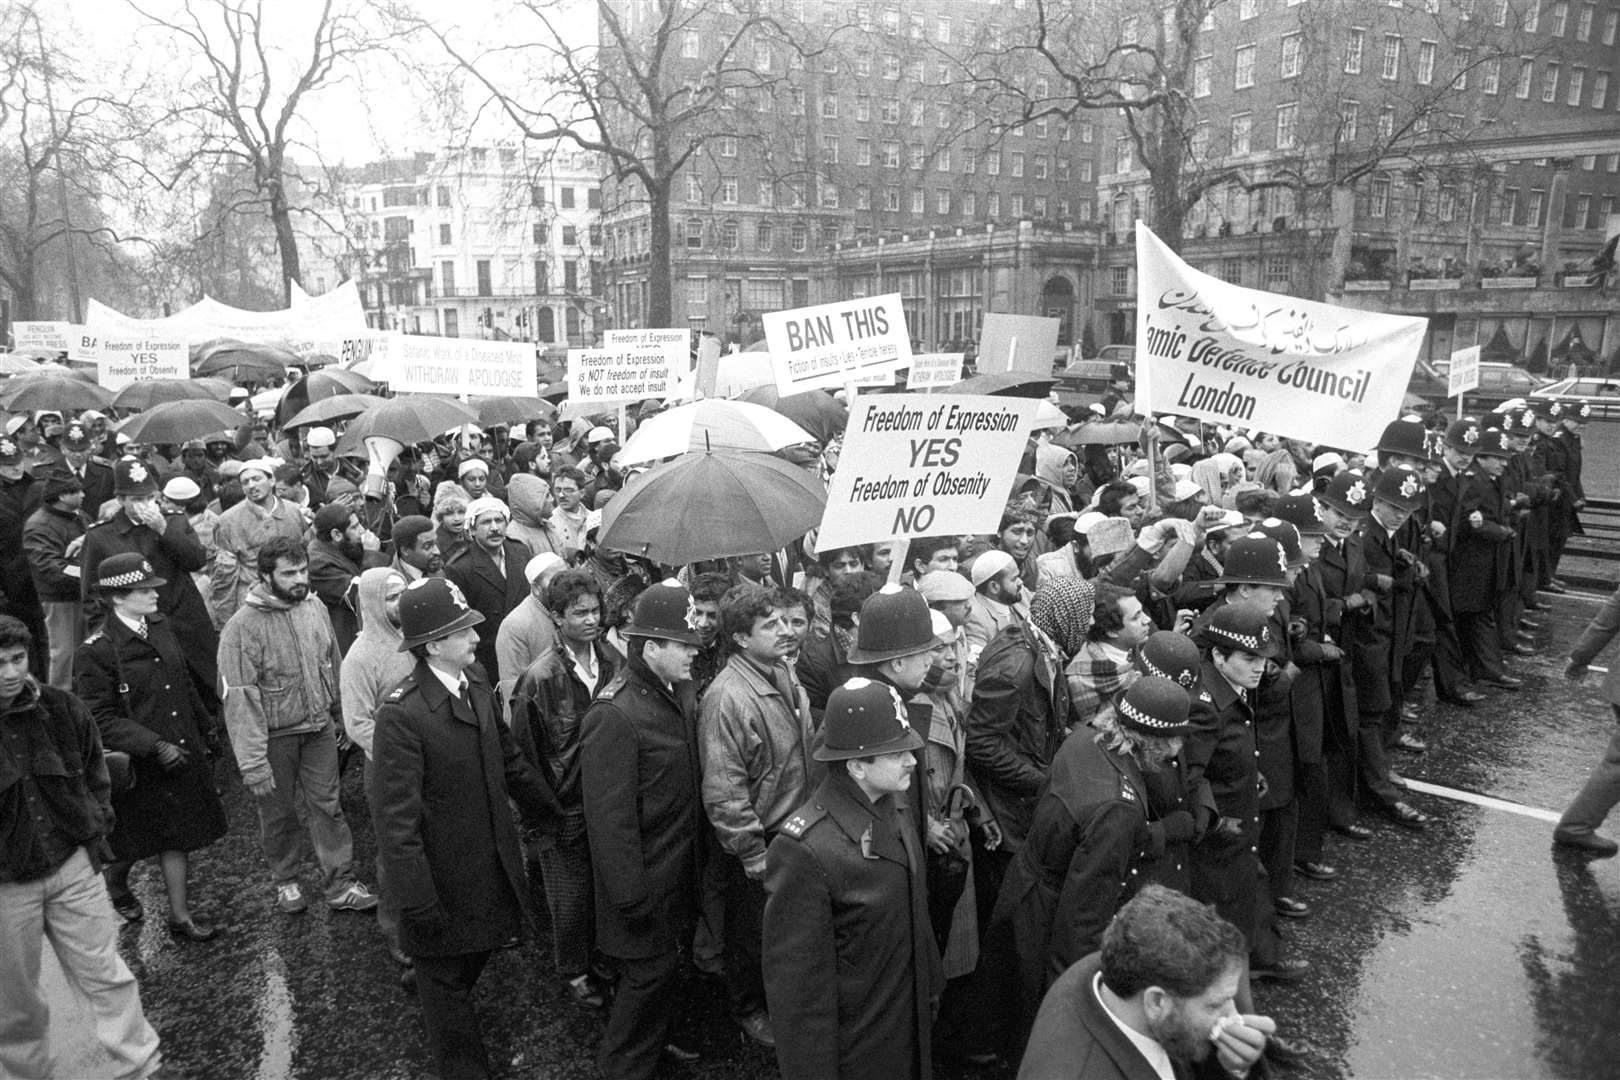 A rally in London’s Park Lane against the publication of Salman Rushdie’s controversial book The Satanic Verses in 1989 (PA)